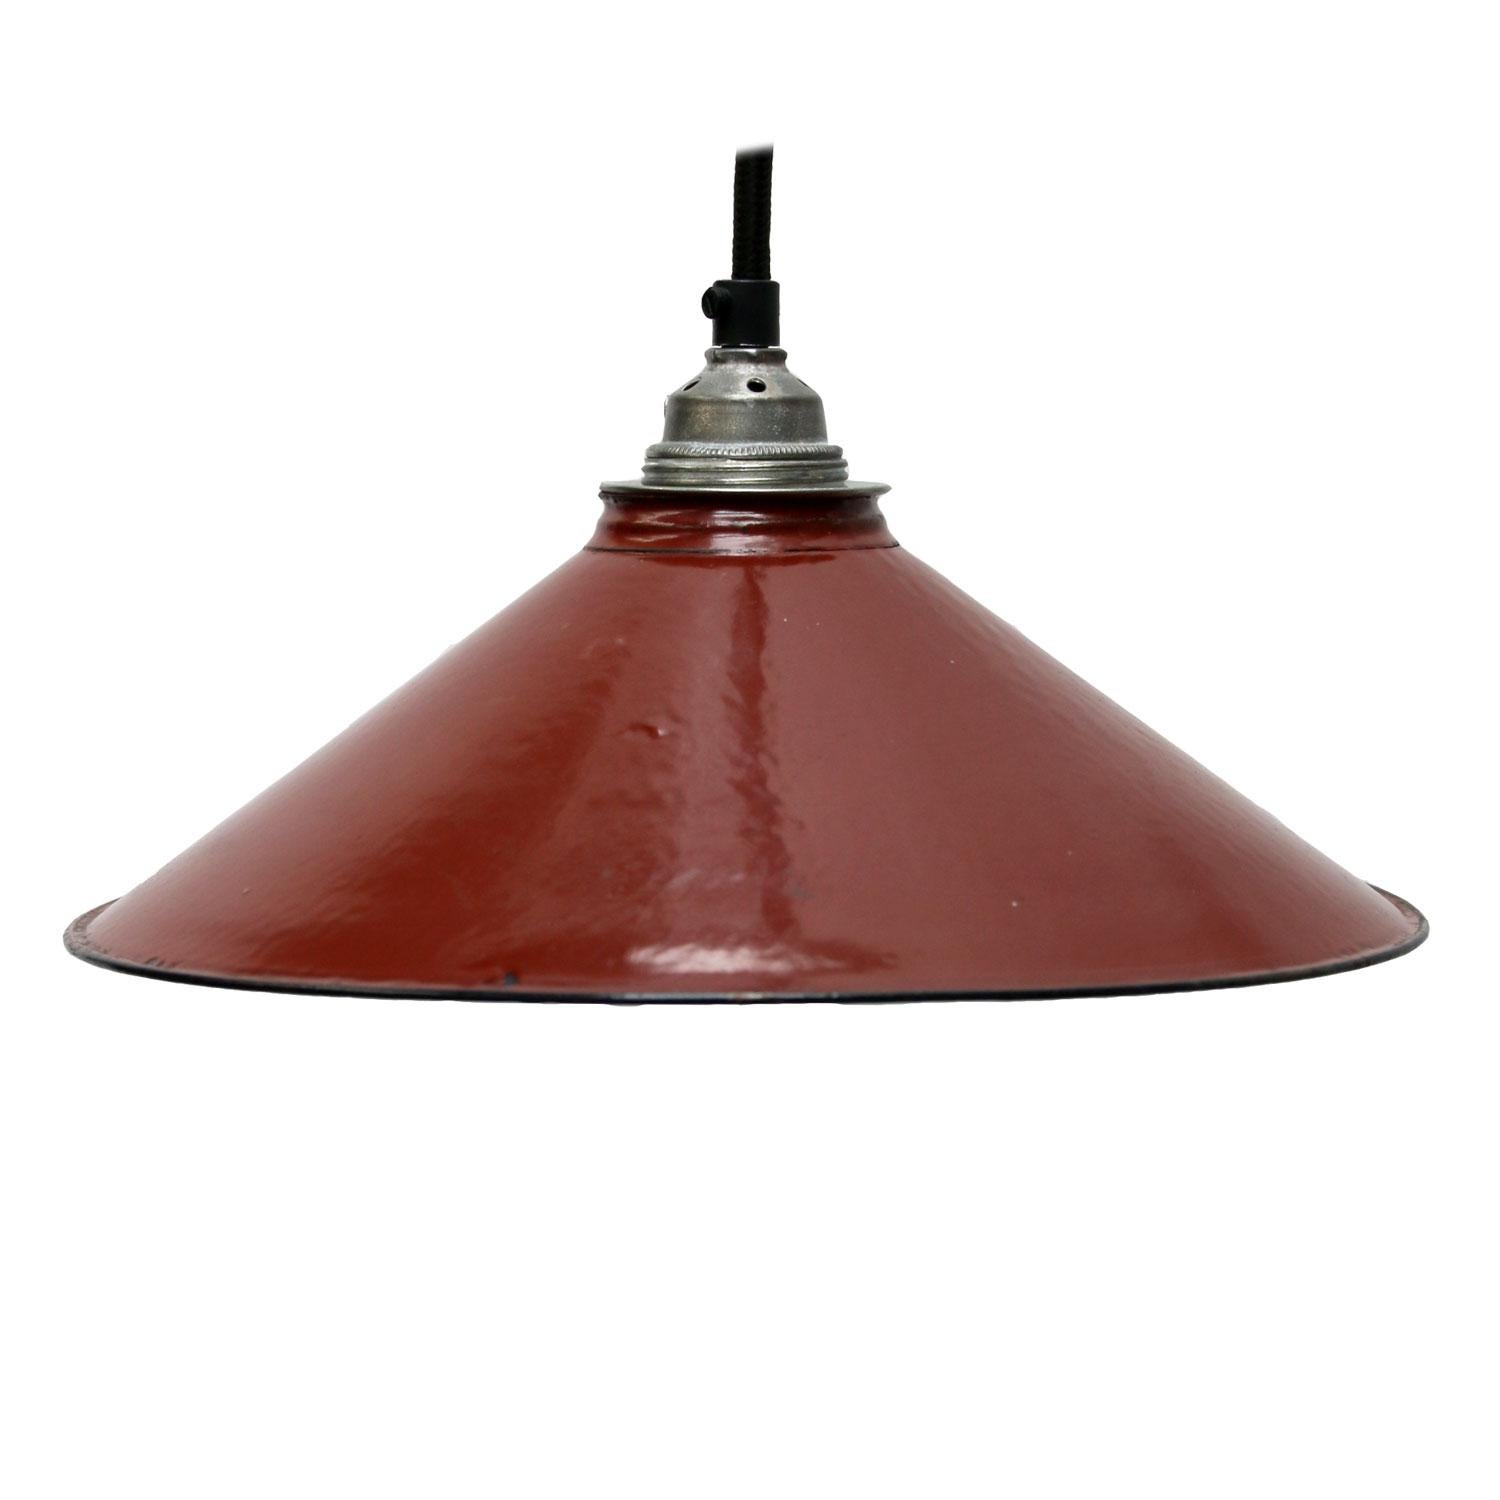 Small French industrial pendant.

Measure: Weight 0.5 kg / 1.1 lb

Priced per individual item. All lamps have been made suitable by international standards for incandescent light bulbs, energy-efficient and LED bulbs. E26/E27 bulb holders and new